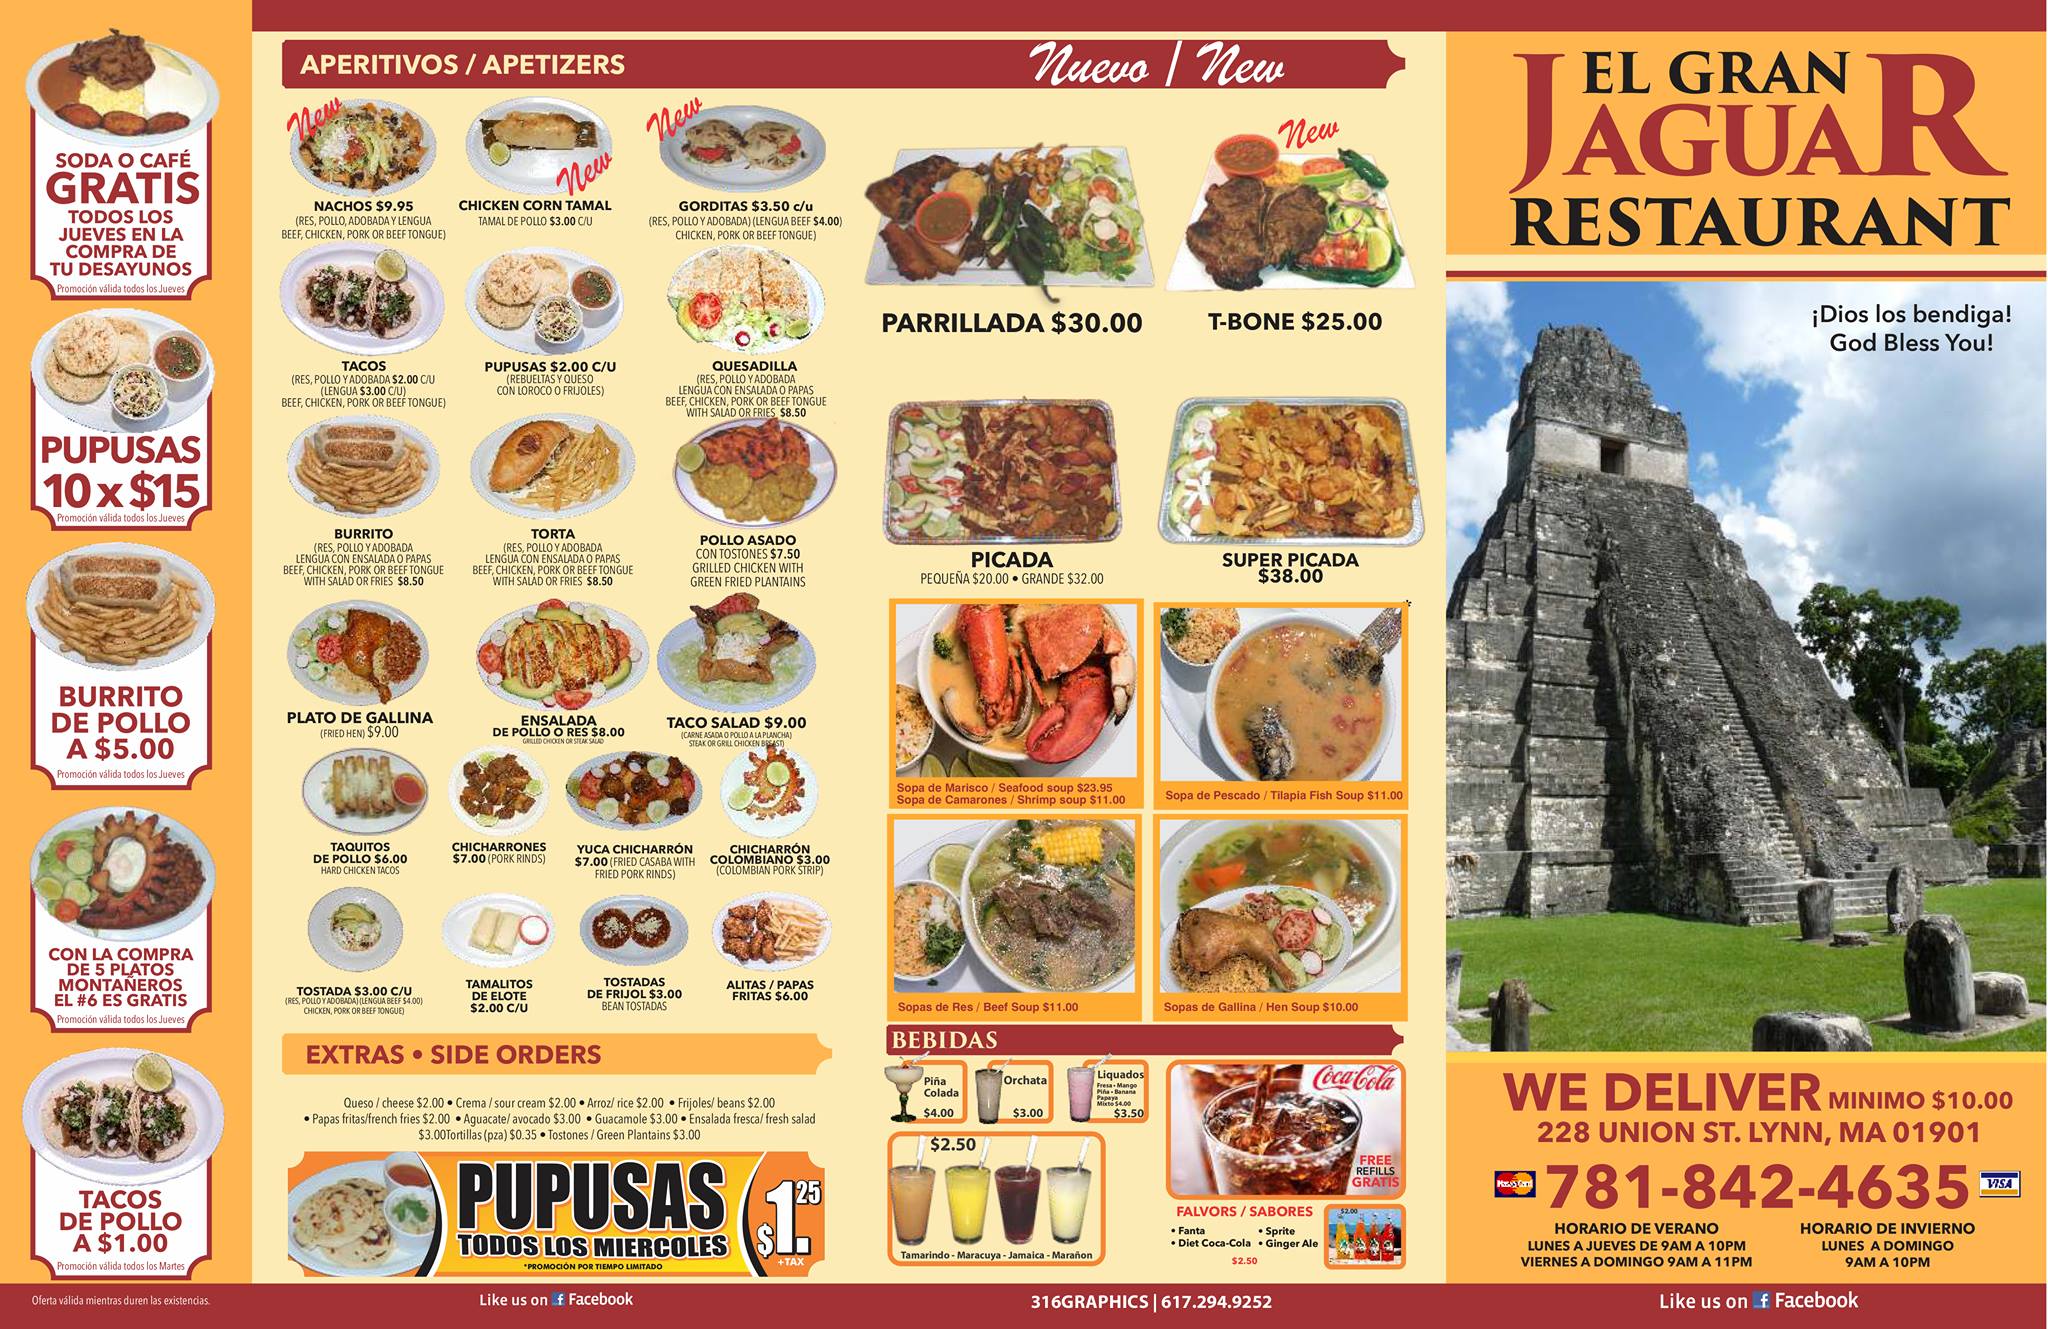 a menu for a mexican restaurant with pictures of food.